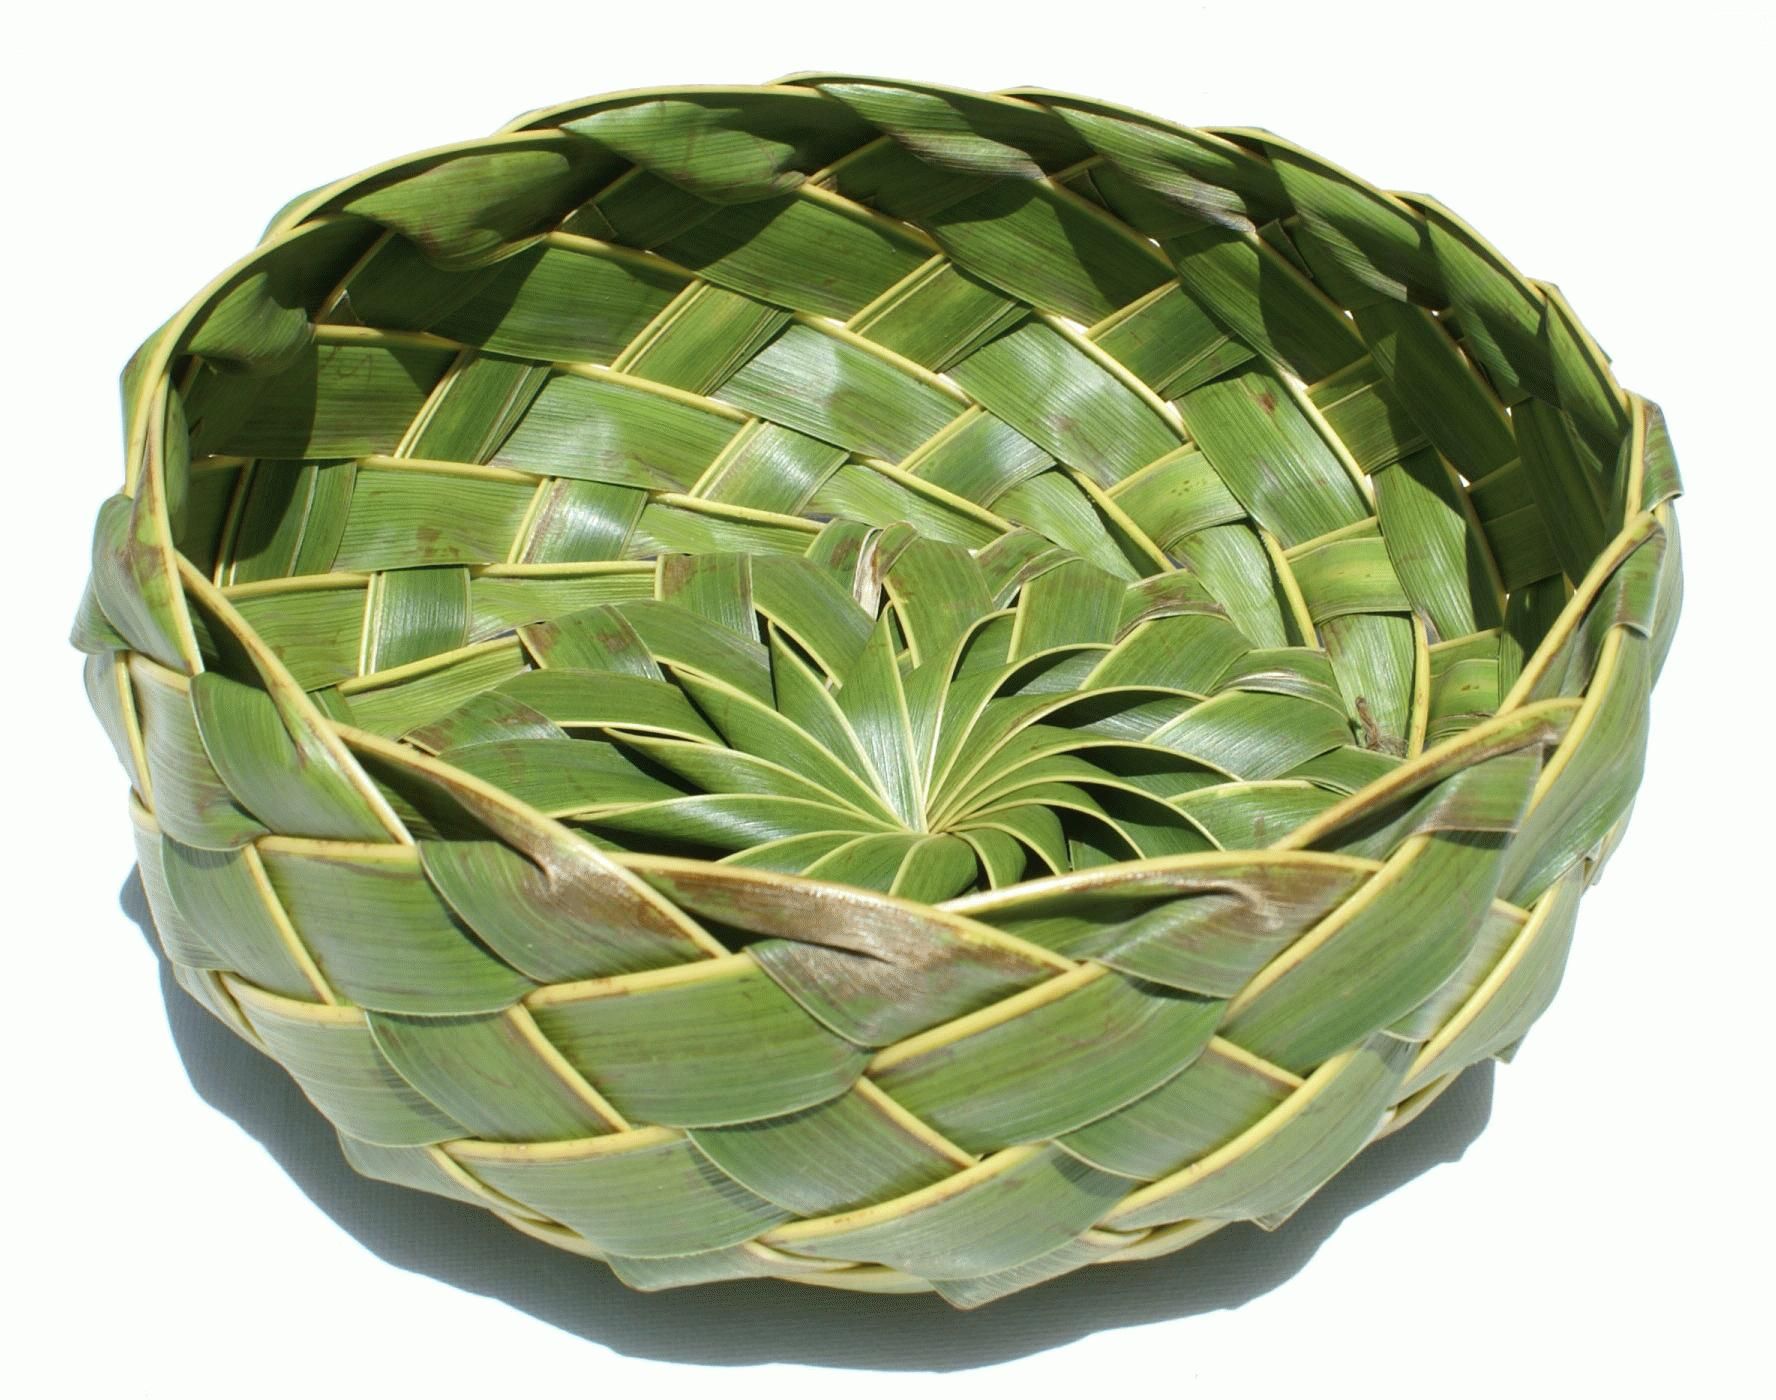 Weaving baskets with date palm leaves